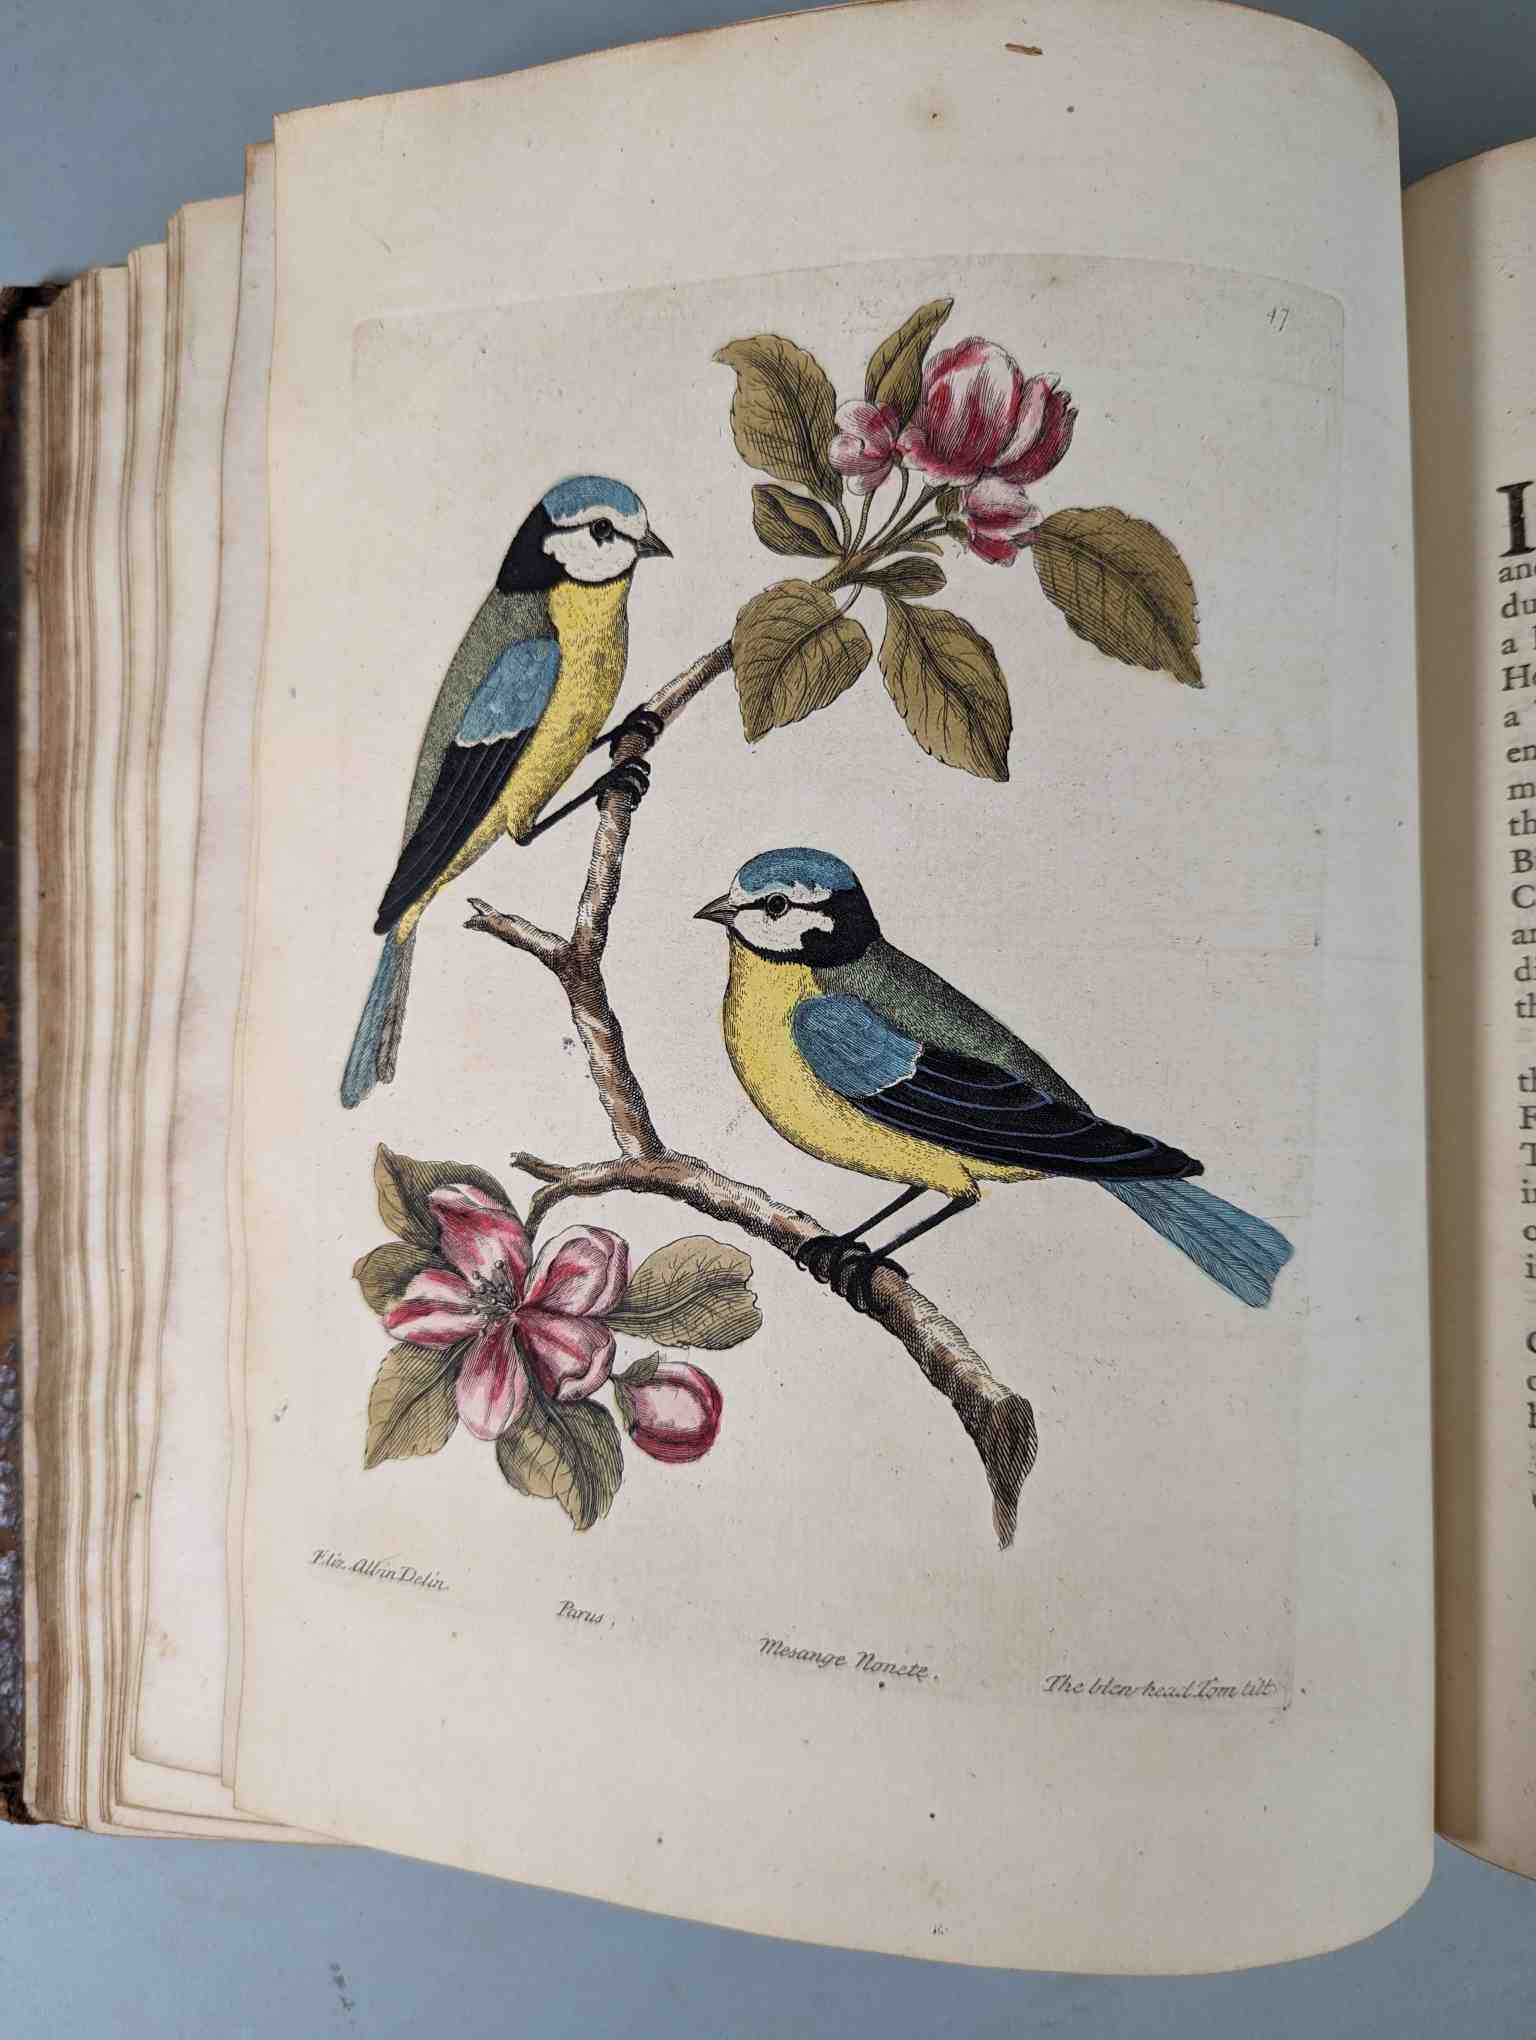 ALBIN, Eleazar. A Natural History of Birds, to which are added, Notes and Observations by W. - Image 50 of 208